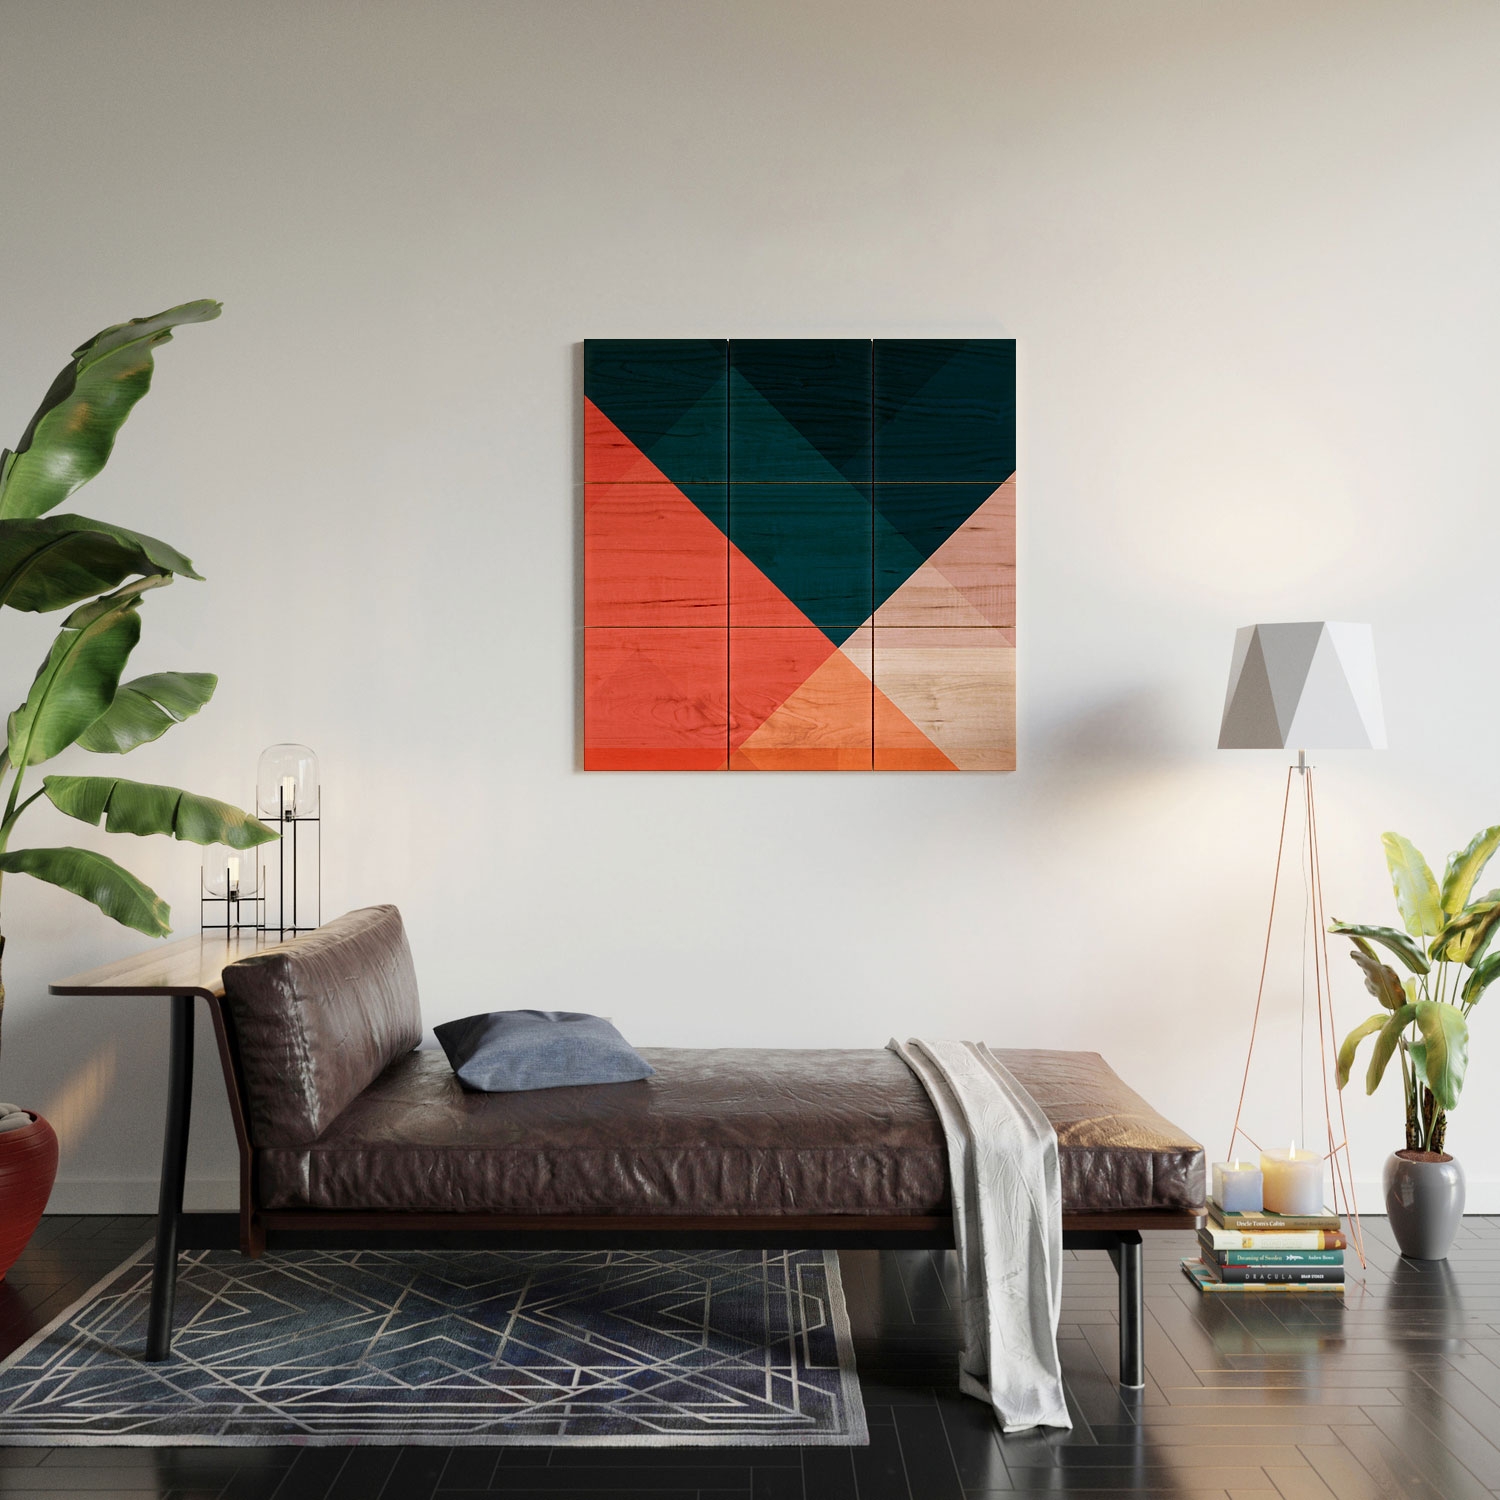 Geometric 1708 by The Old Art Studio - Wood Wall Mural3' X 3' (Nine 12" Wood Squares) - Image 2